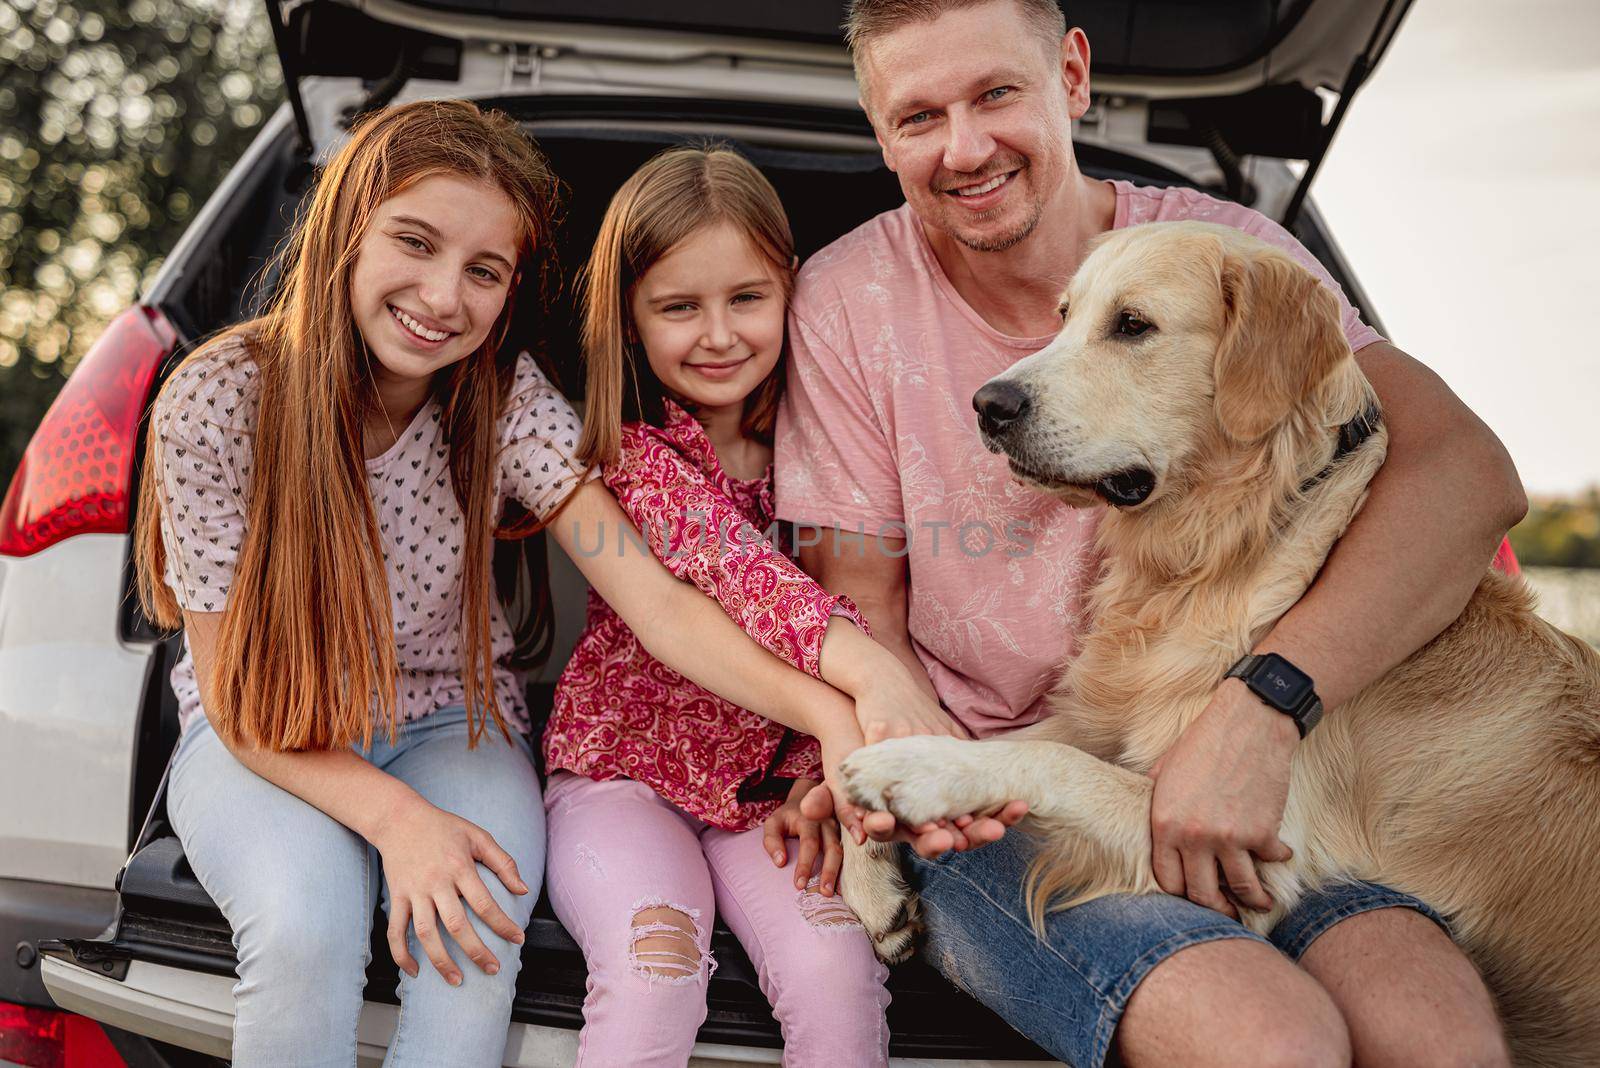 Father with daughters and golden retriever sitting in car trunk on nature